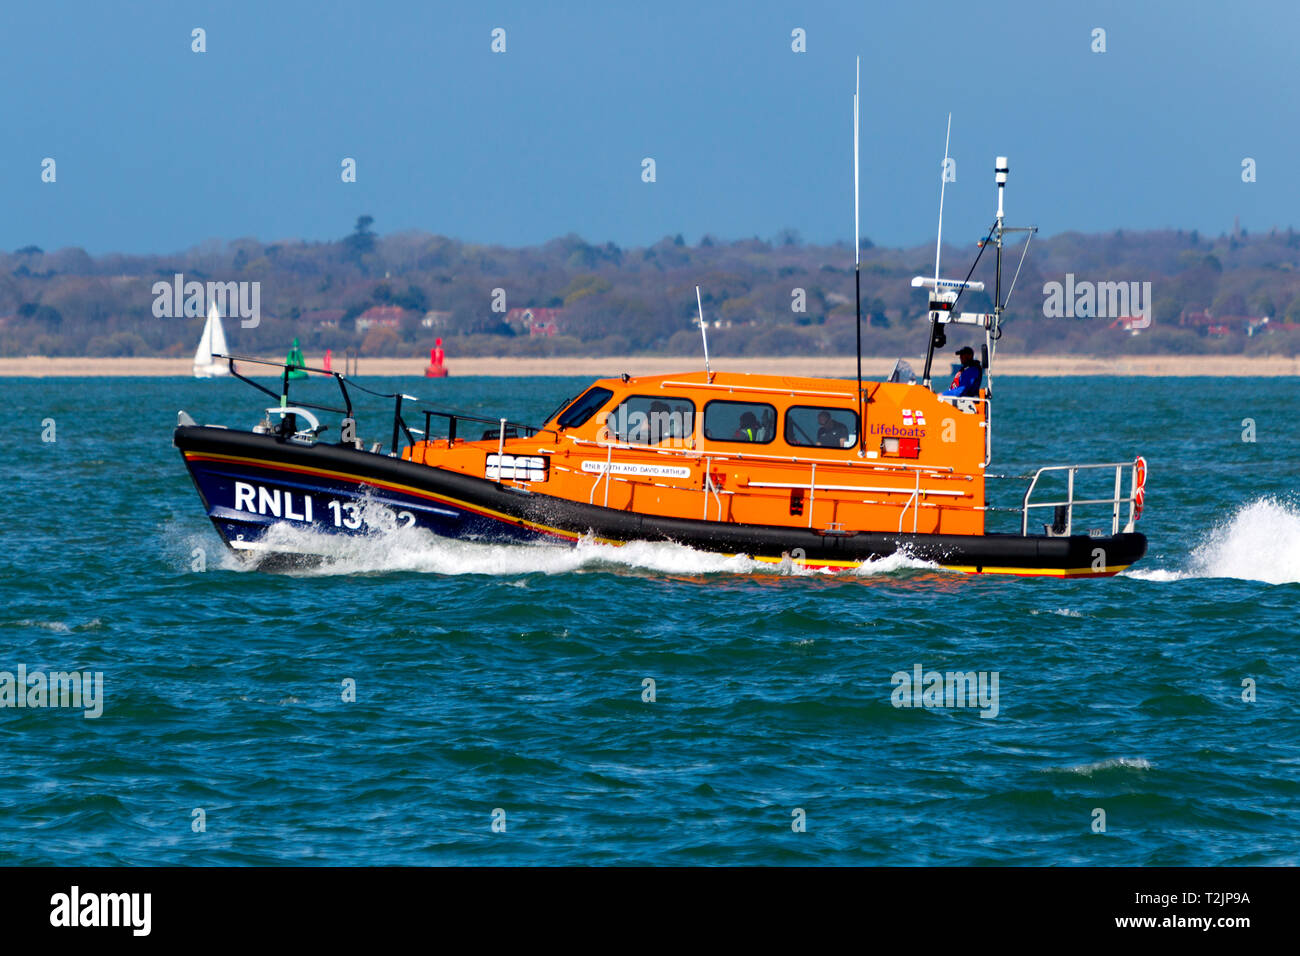 RNLI,lifeboat,Royal National Lifeboat Institute, boat,rescue,Cowes,Isle of Wight,England,UK, Stock Photo